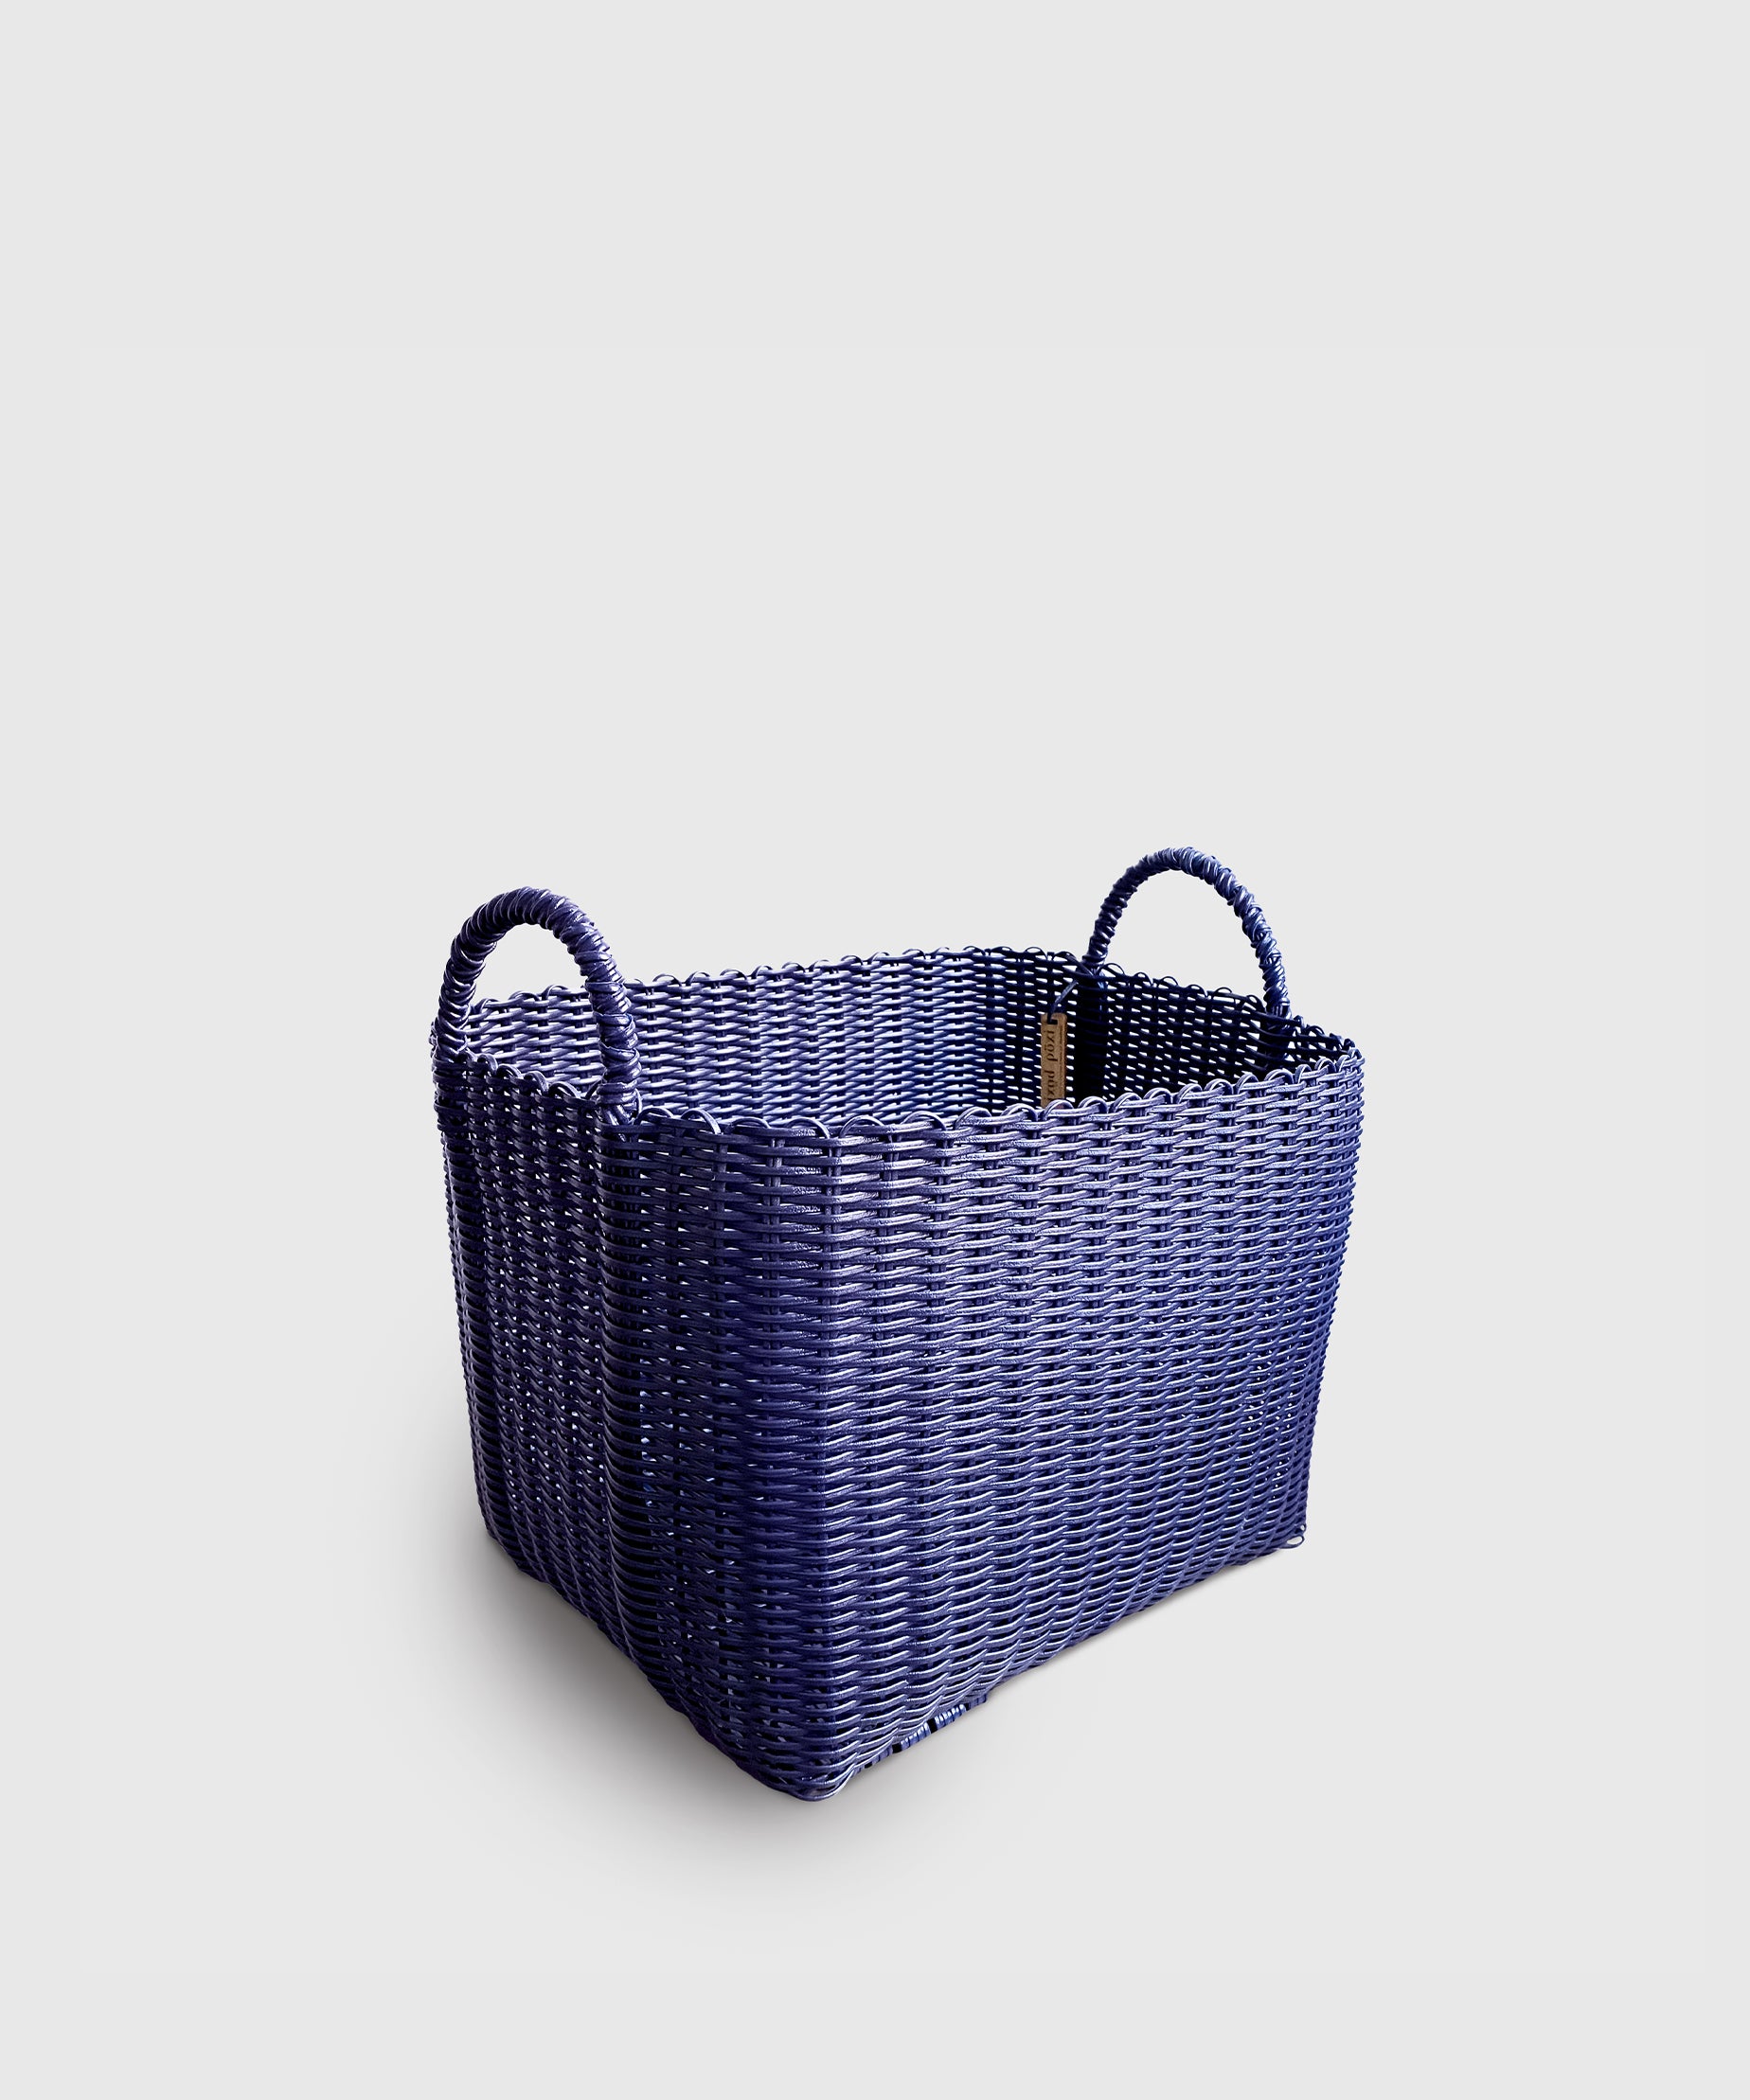 Best Totes Bags, Home Goods & Accessories – ixoq-boxi